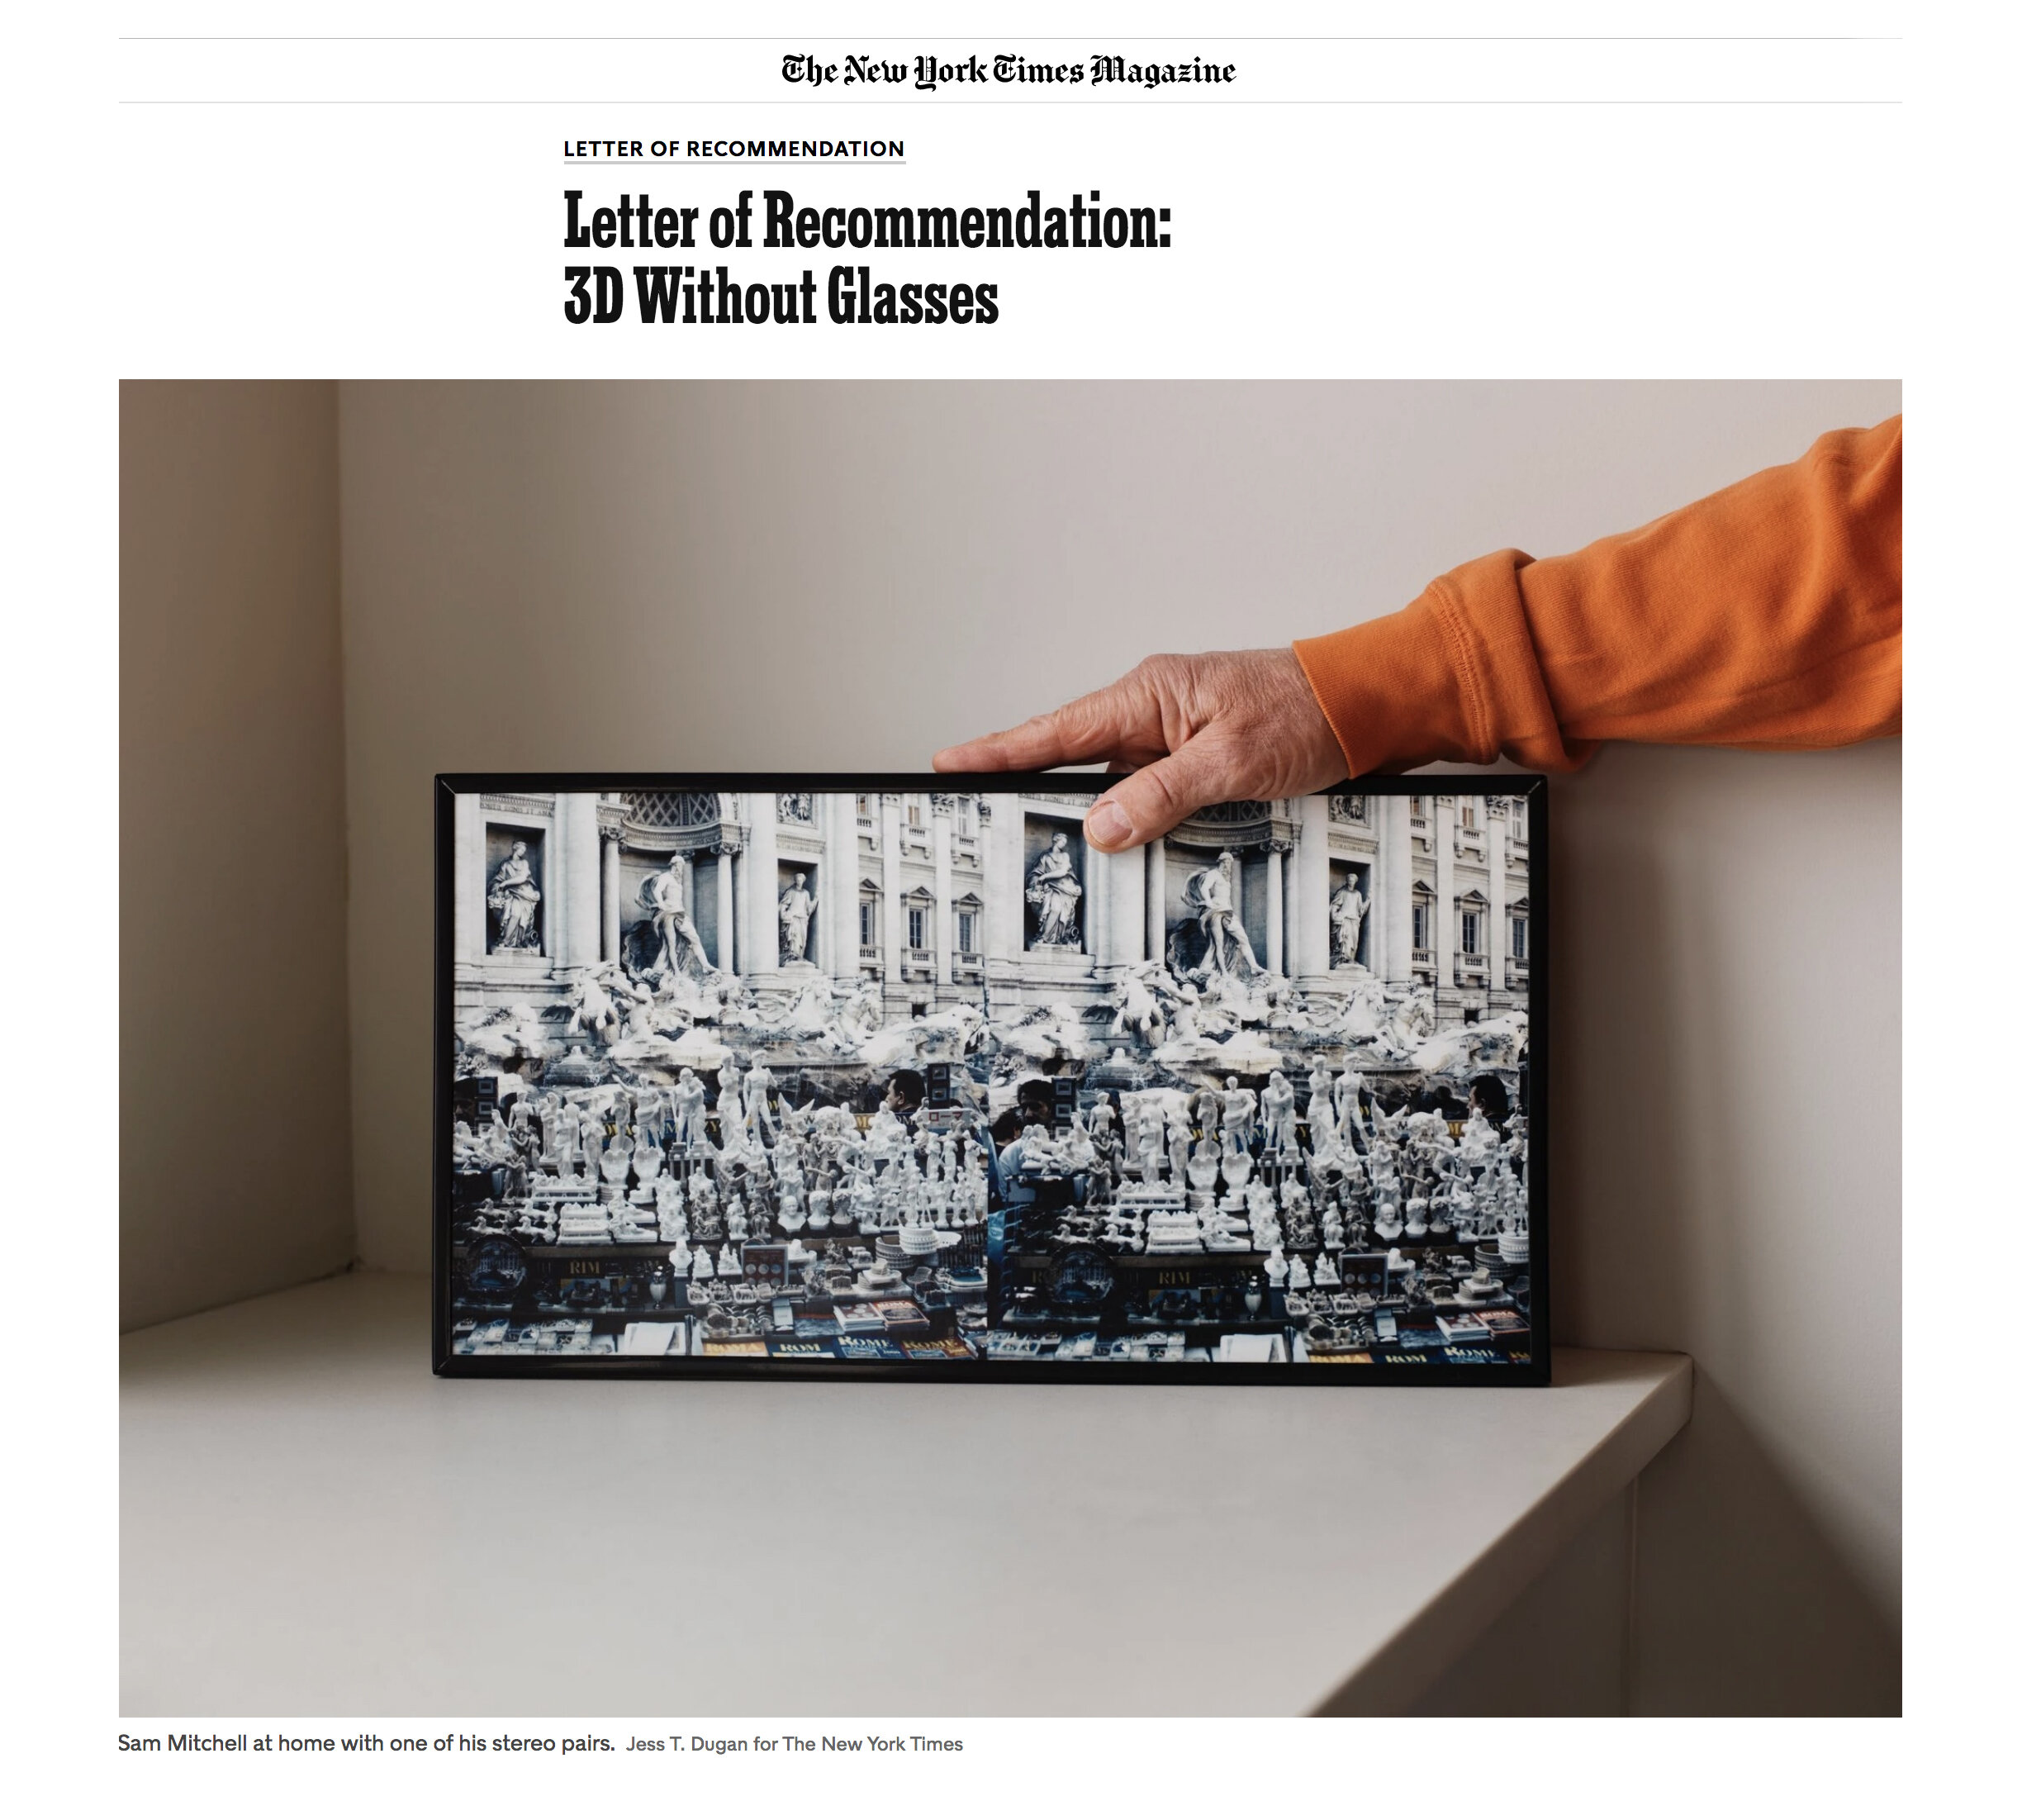  Photographer Sam Mitchell at home with one of his stereo photographs, for  The New York Times Magazine , 2019.  